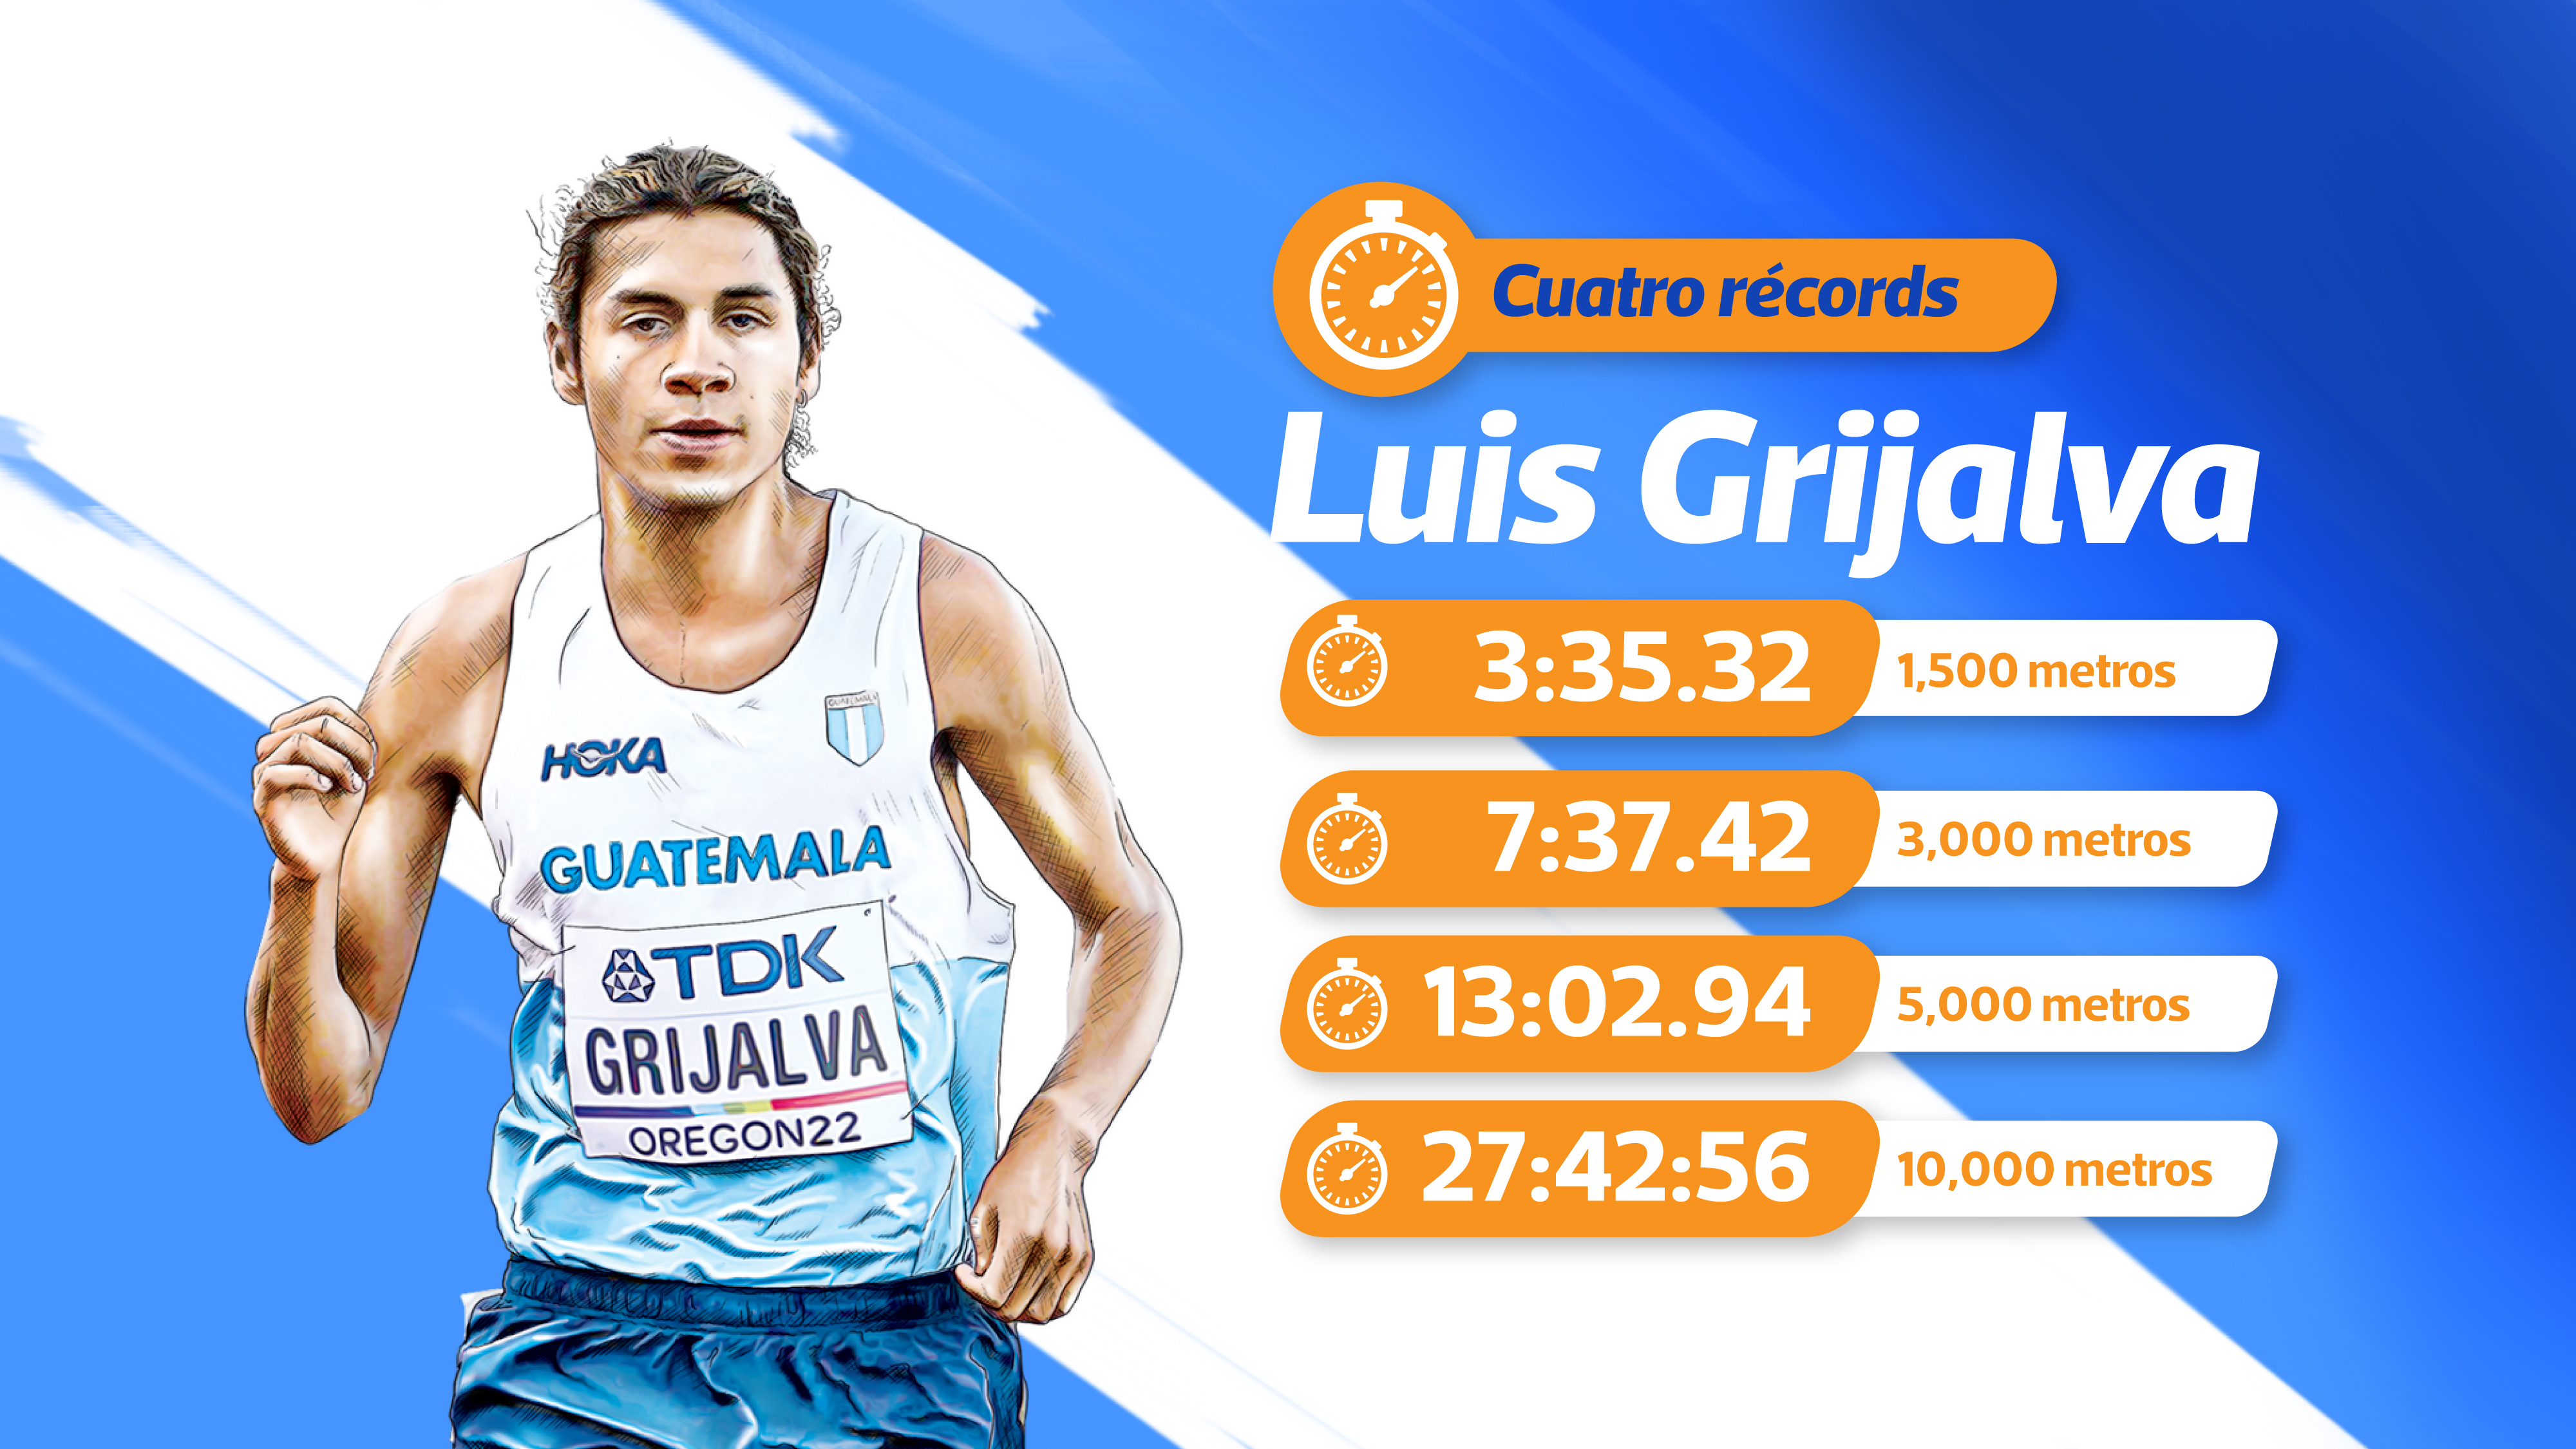 Luis Grijalva collects four national records and an impressive drop in world athletics